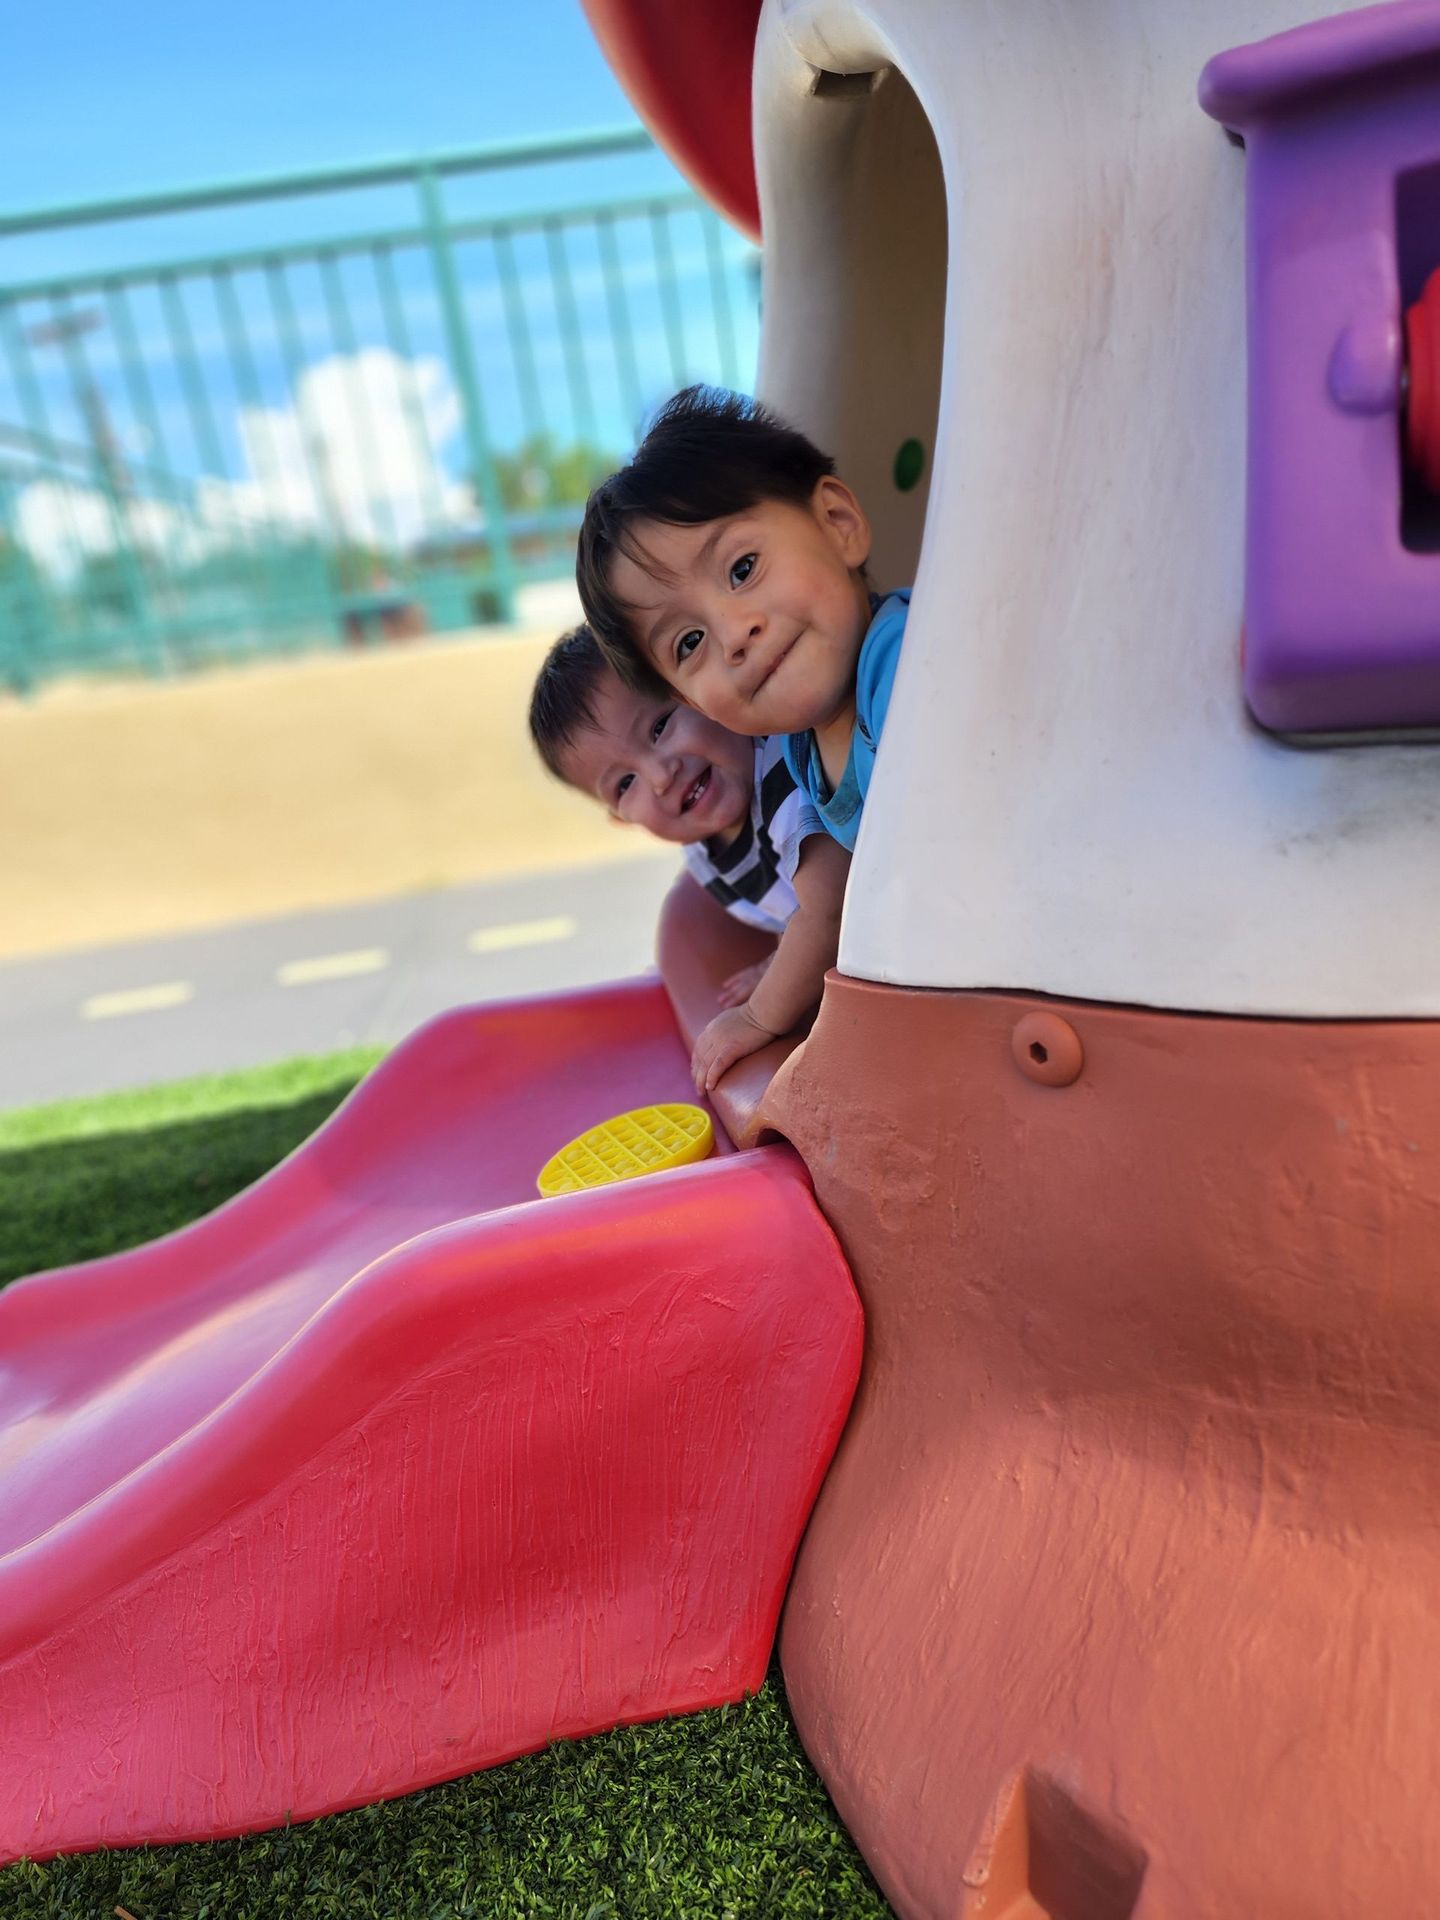 two children are playing on a slide in a playground